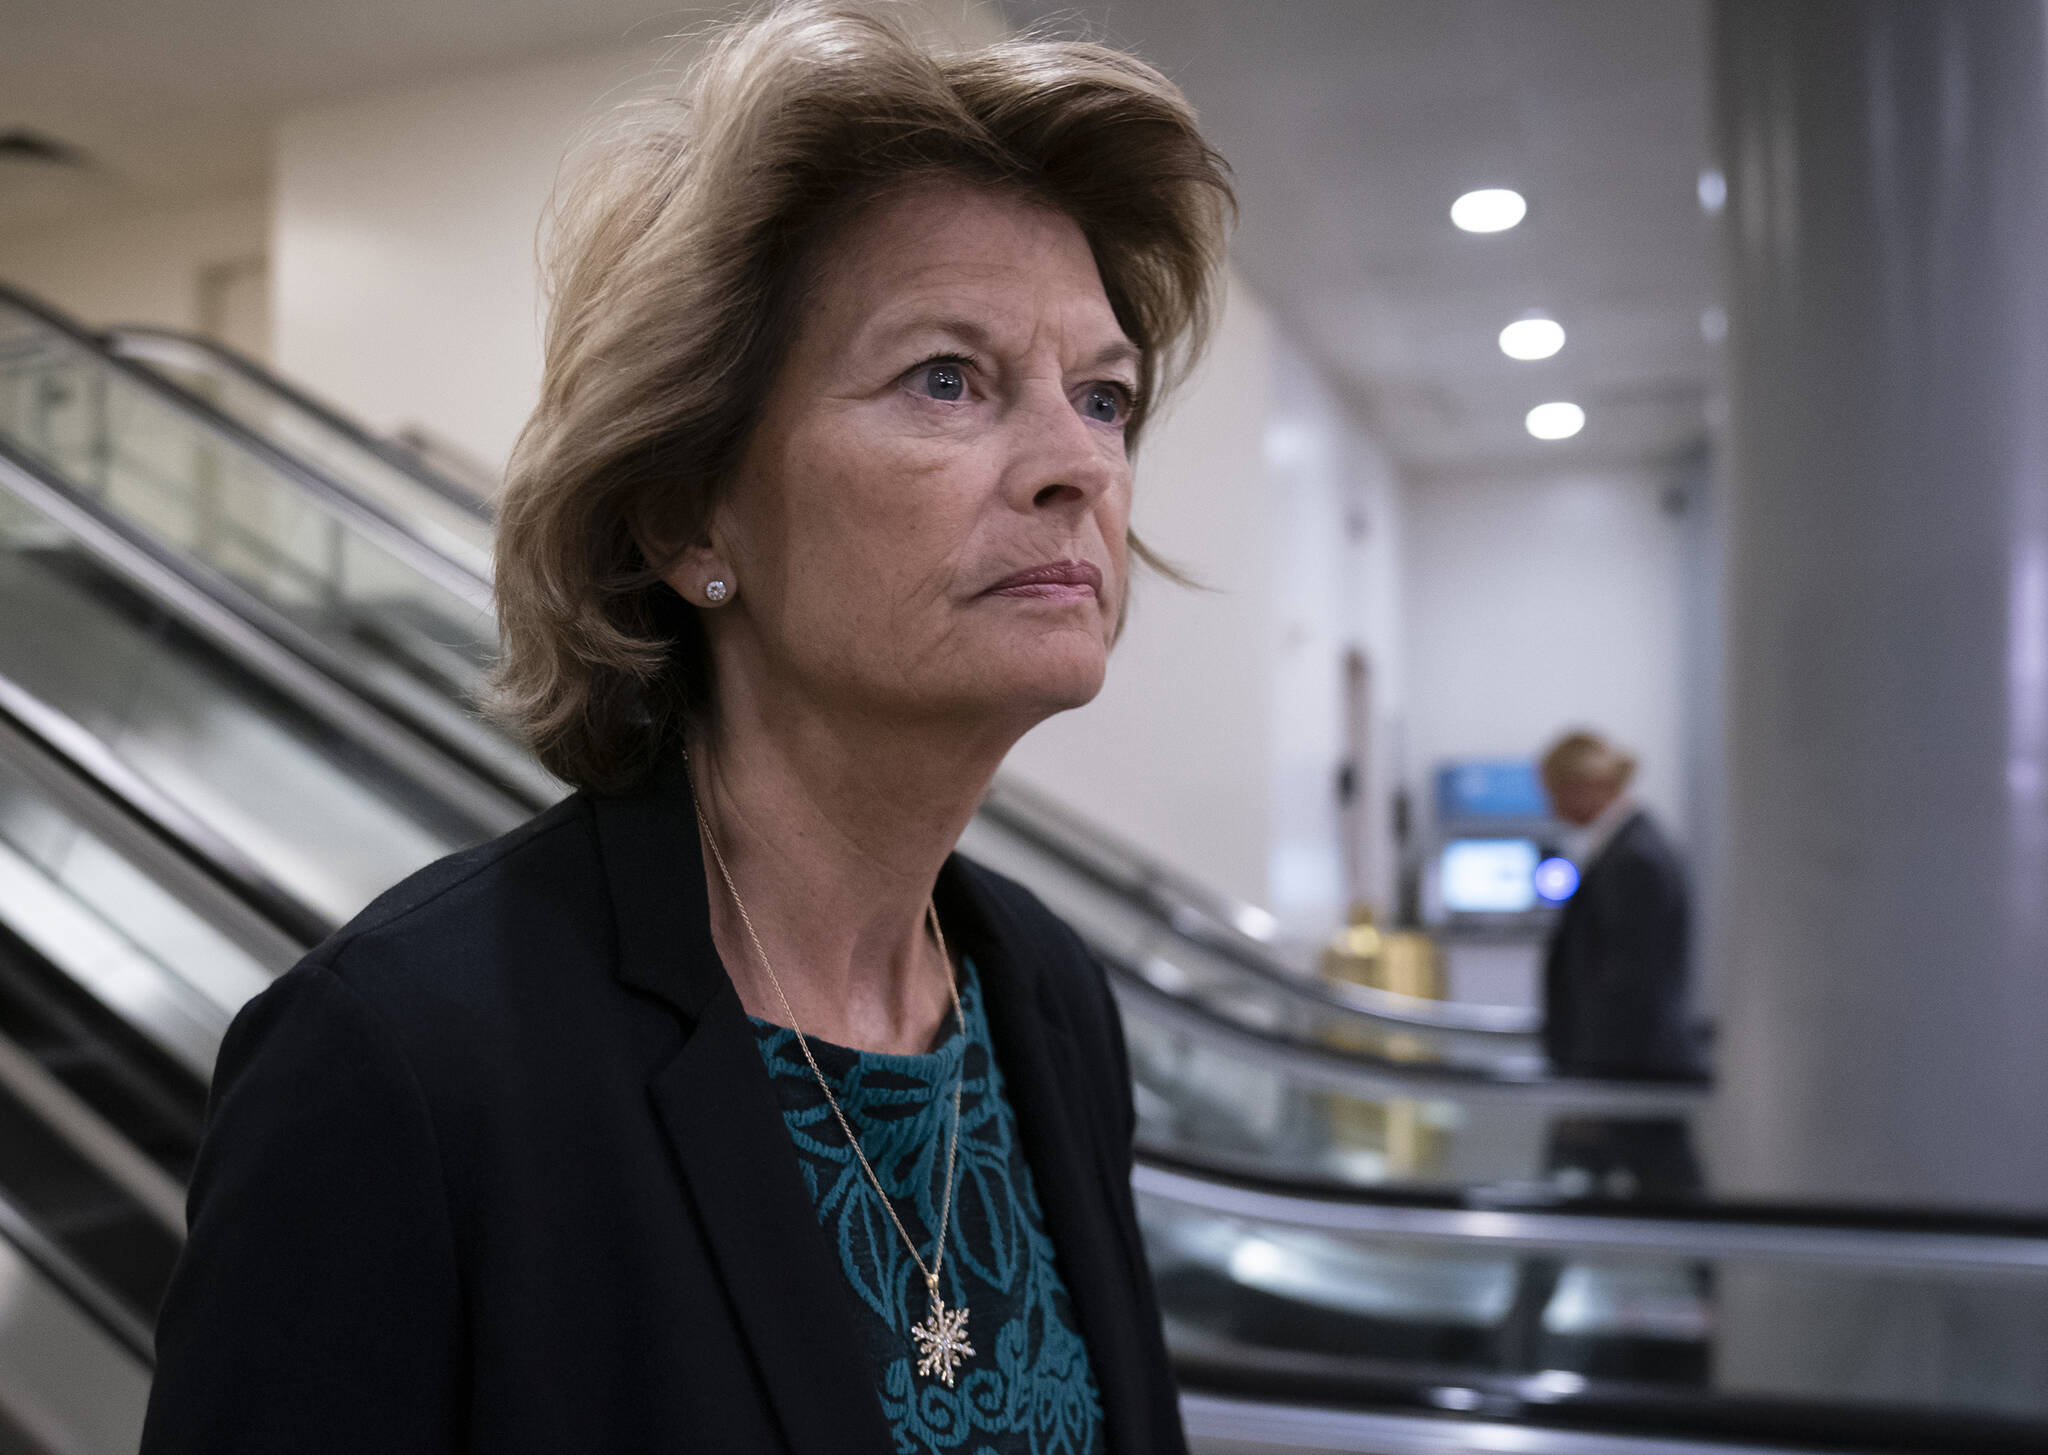 In this Jan. 8, 2020, photo Sen. Lisa Murkowski, R-Alaska, heads to a briefing on Capitol Hill in Washington. An Alaska man faces federal charges after authorities allege he threatened to hire an assassin to kill Murkowski, according to court documents unsealed Wed., Oct. 6, 2021. (AP Photo/J. Scott Applewhite,File)